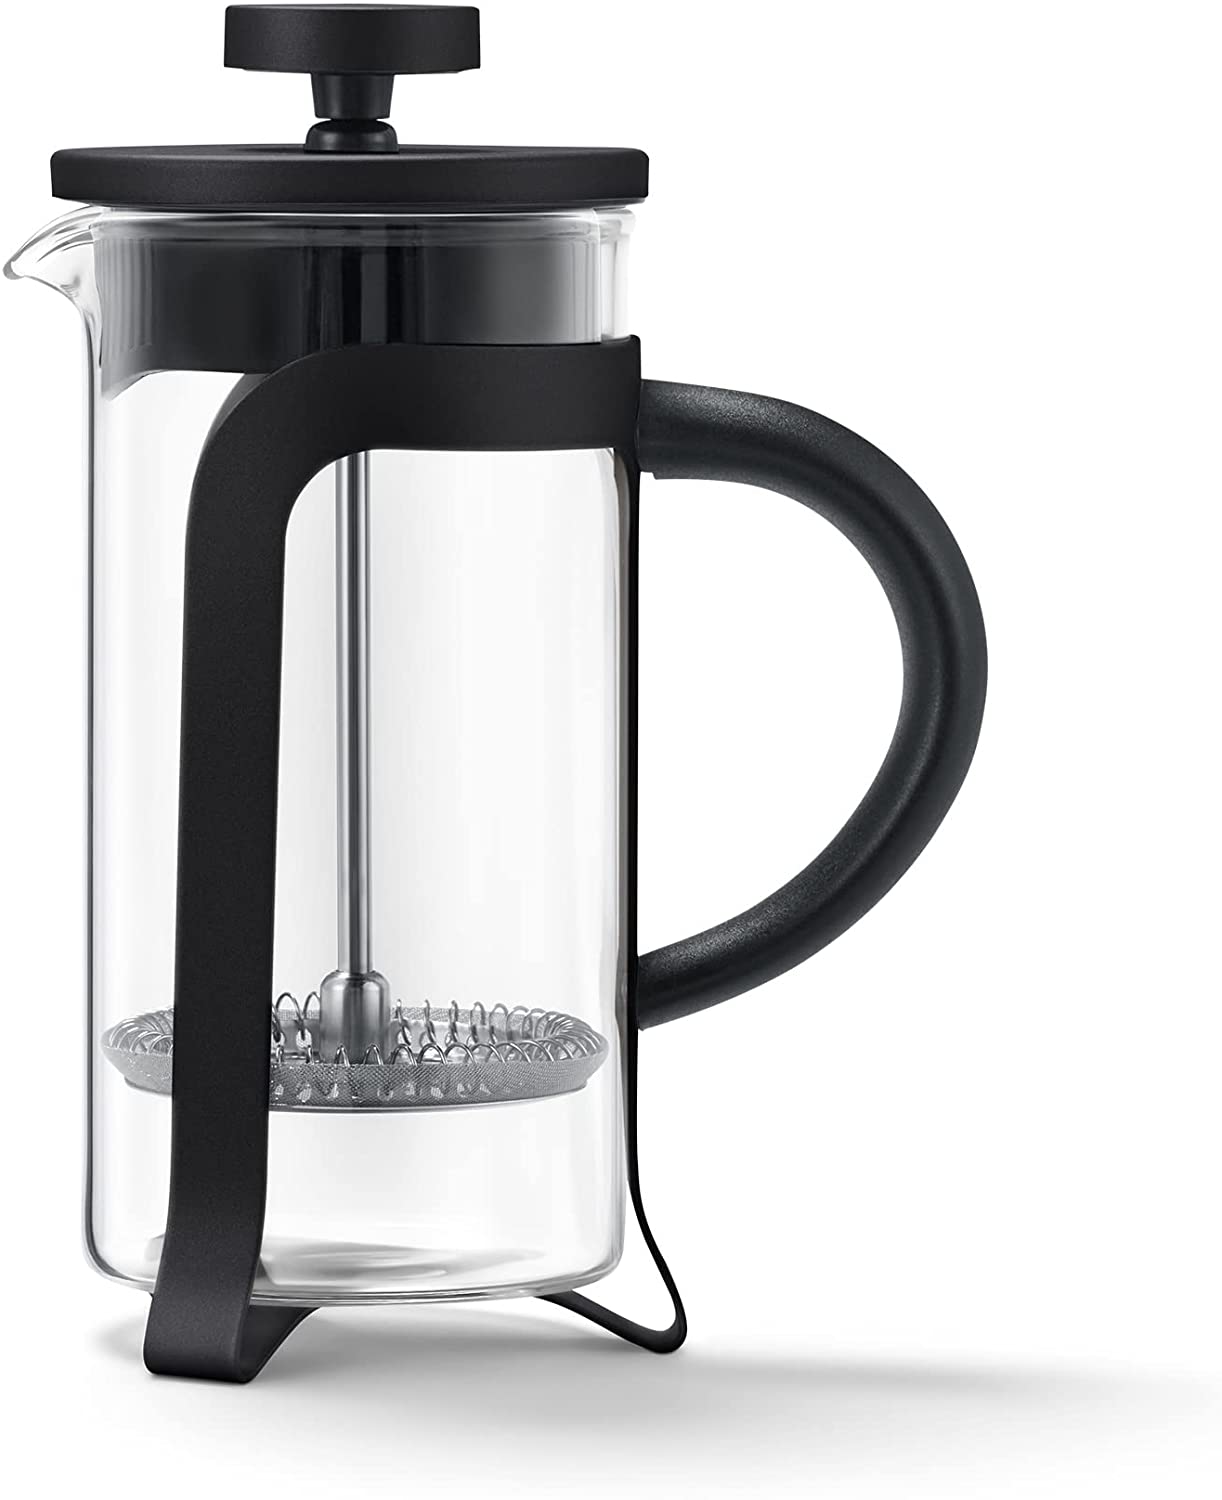 Tchibo Strainer Stamp Jug for Manual Coffee Preparation, French Press with Heat Heat resistant Borosilicate Glass, Dishwasher Safe, 300 ml capacity for Approx. 2 cups, Stainless Steel, Black